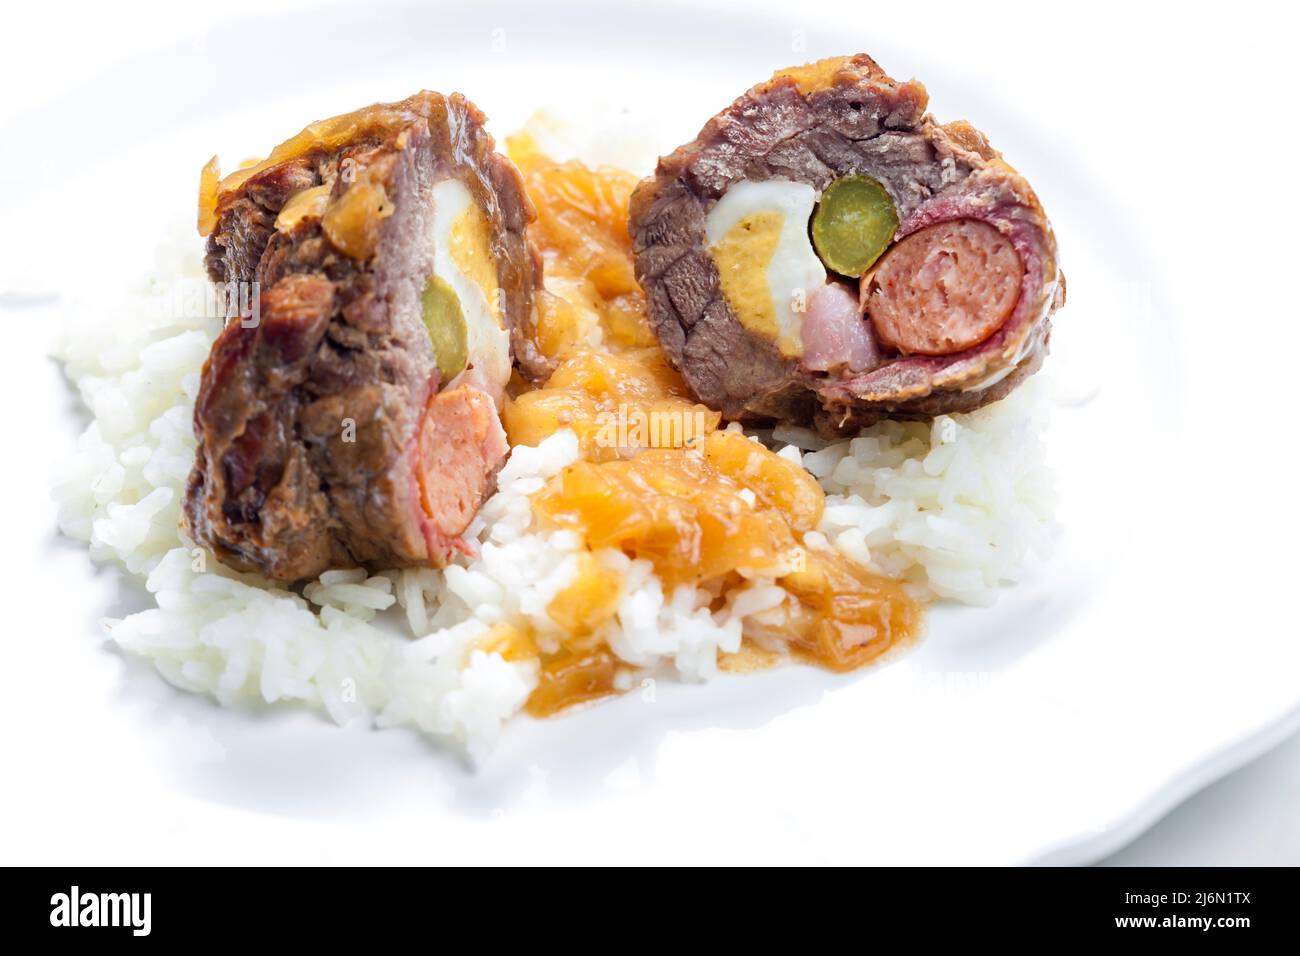 beef roulade filled with egg, sausage, bacon and prickle served with rice. Stock Photo